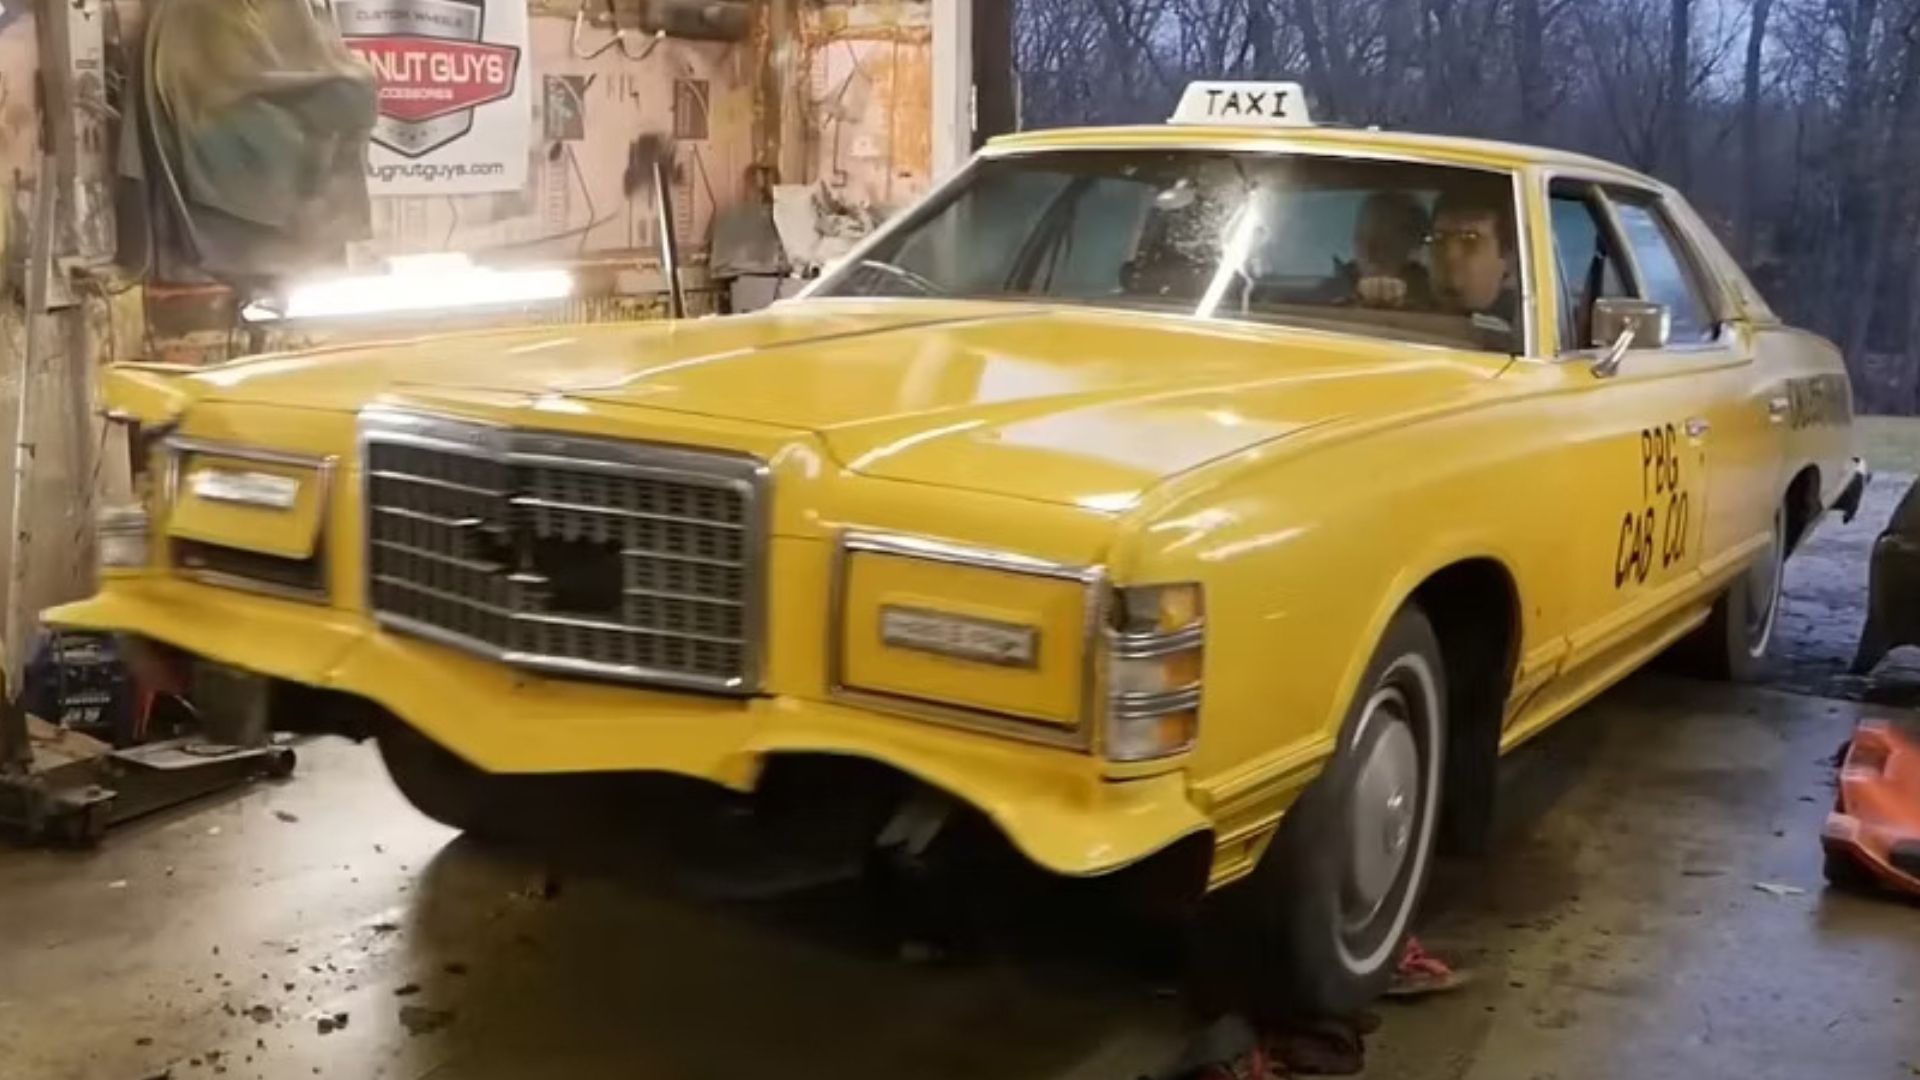 1977 Ford Ltd taxi front in workshop